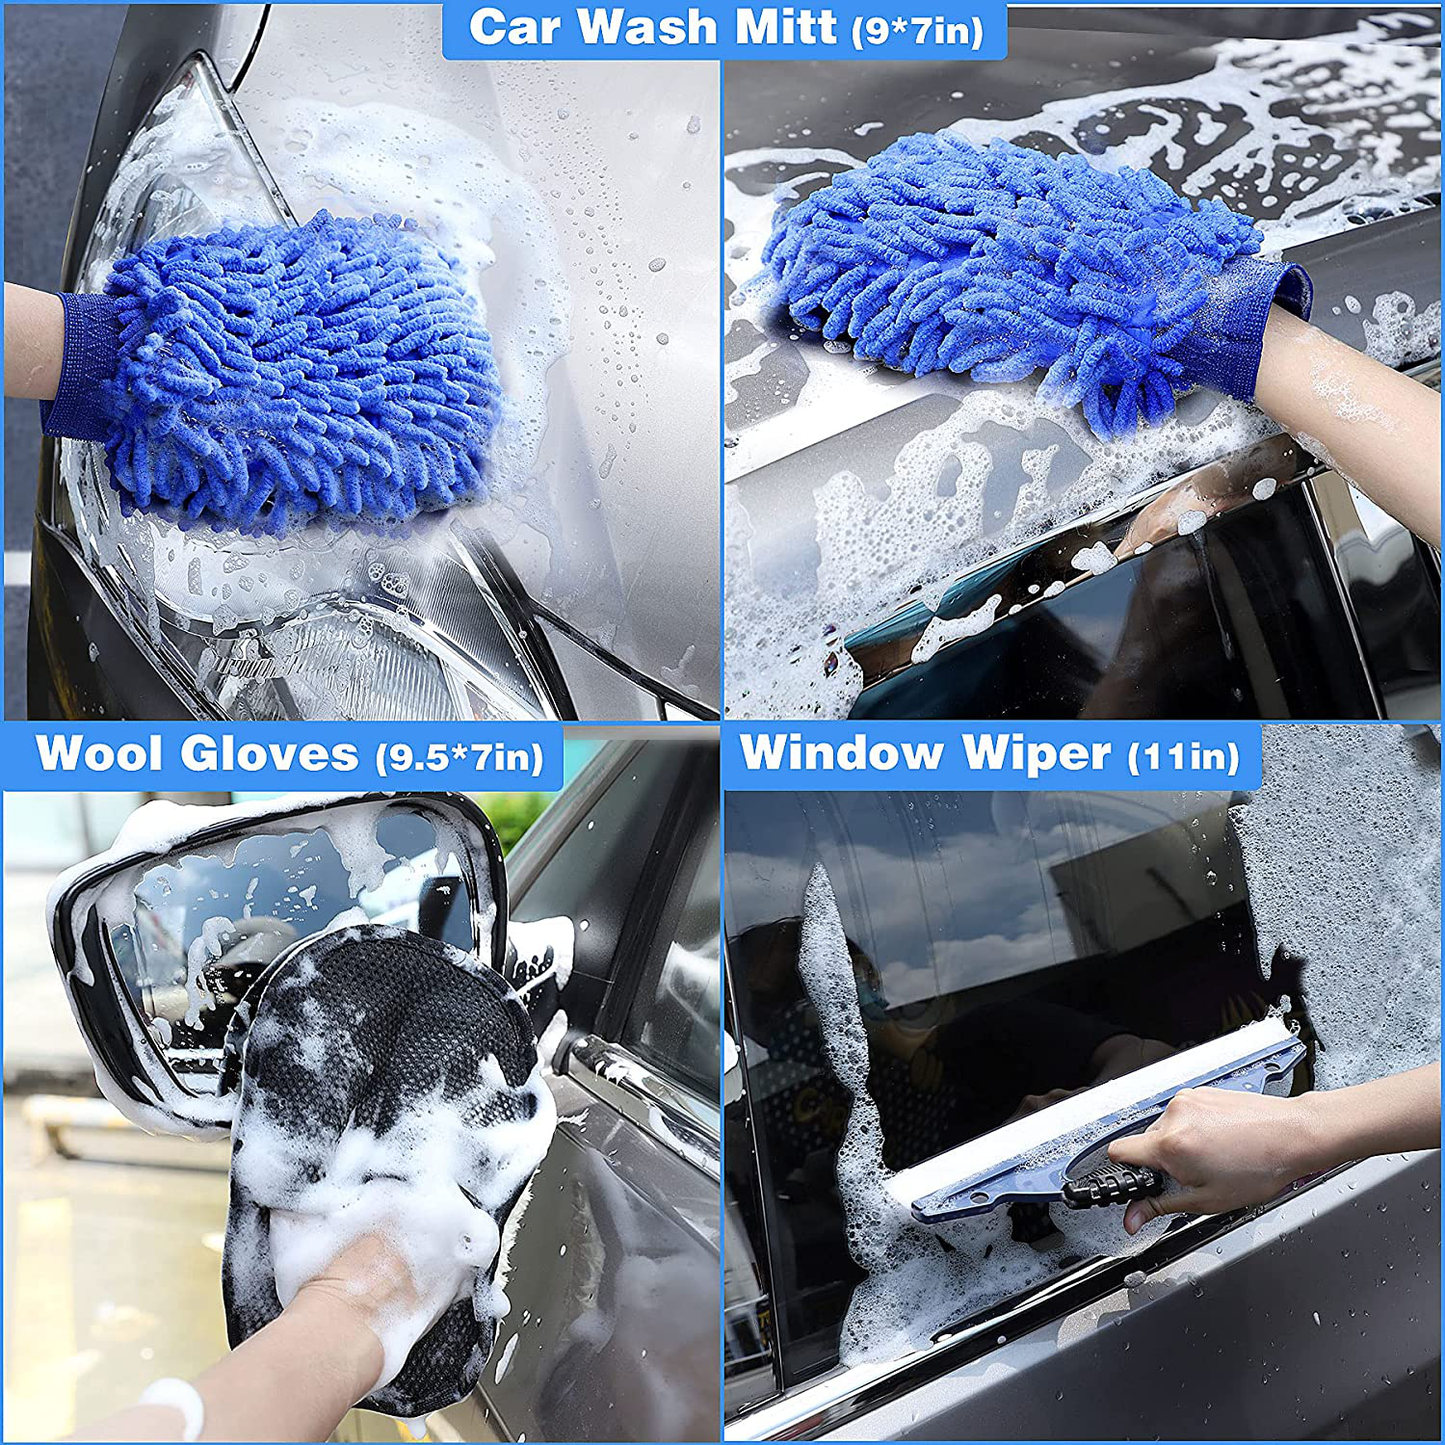 GIVIGO Car Wash Kit 16 Pcs Car Cleaning Kit with Softer Microfiber Cleaning Cloth Thicker Box Car Wash Mitt Duster Squeegee Tire Brush Car Detailing Kit Car Wash Cleaning Tools Set for All Surfaces